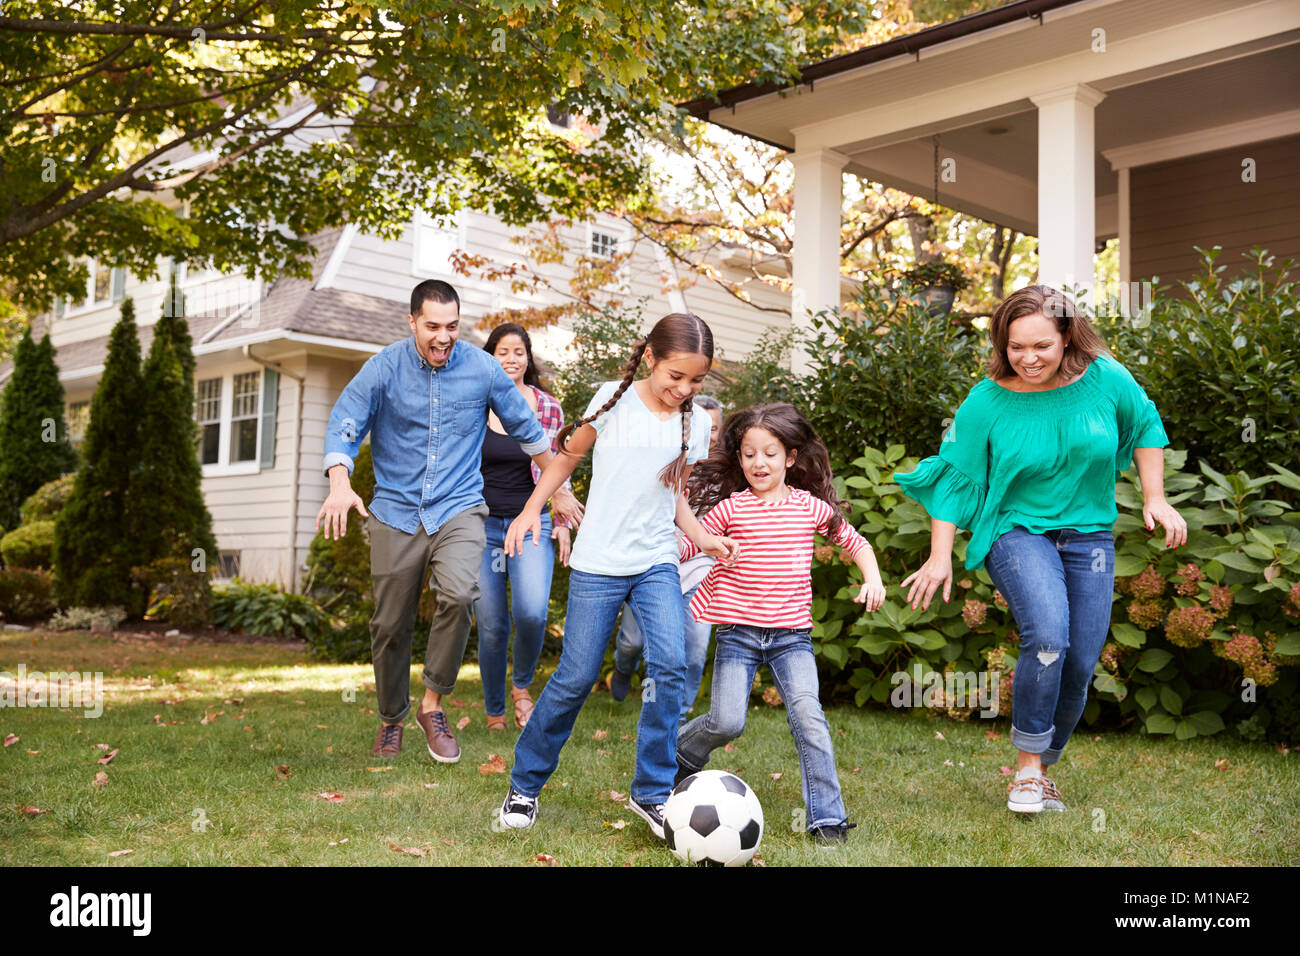 Multi Generation Family Playing Soccer in Garden Banque D'Images